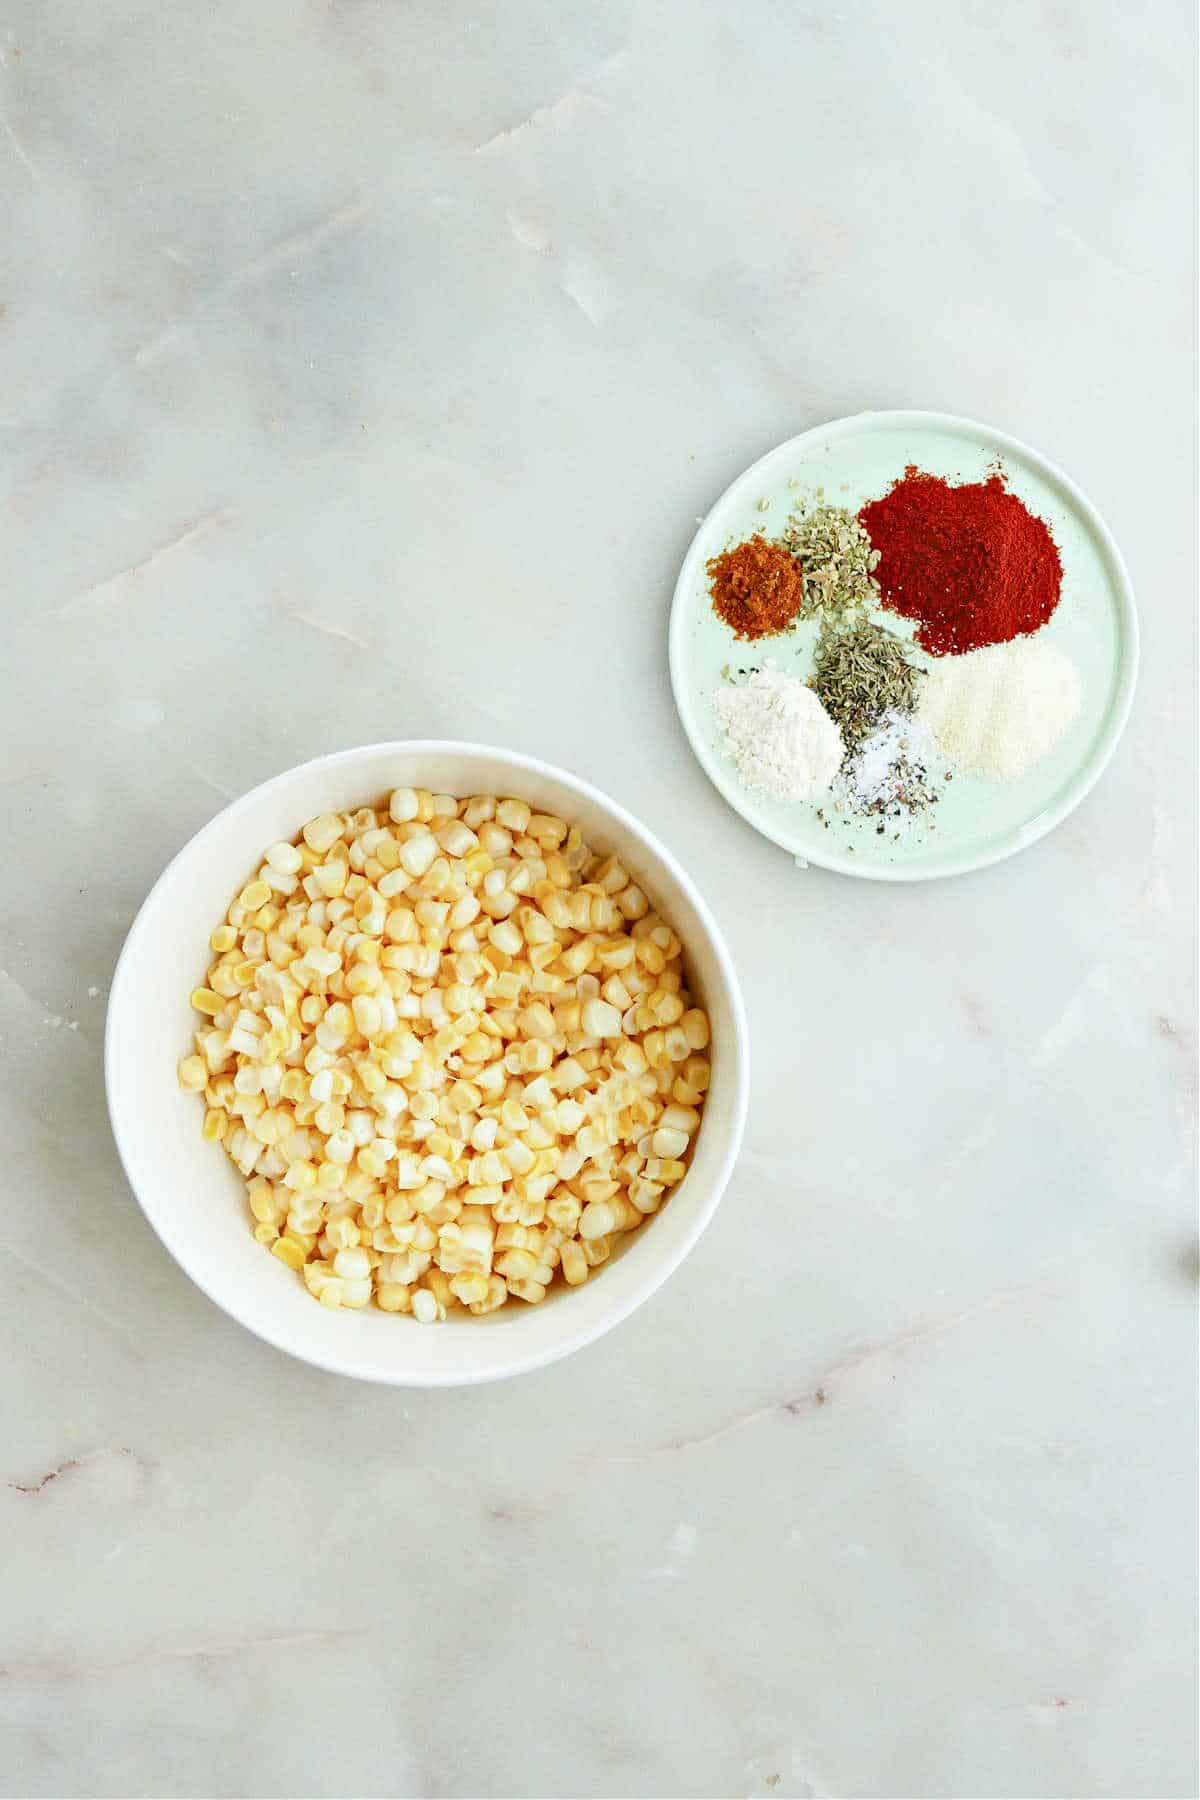 sweet corn in a bowl and spices on a plate next to each other